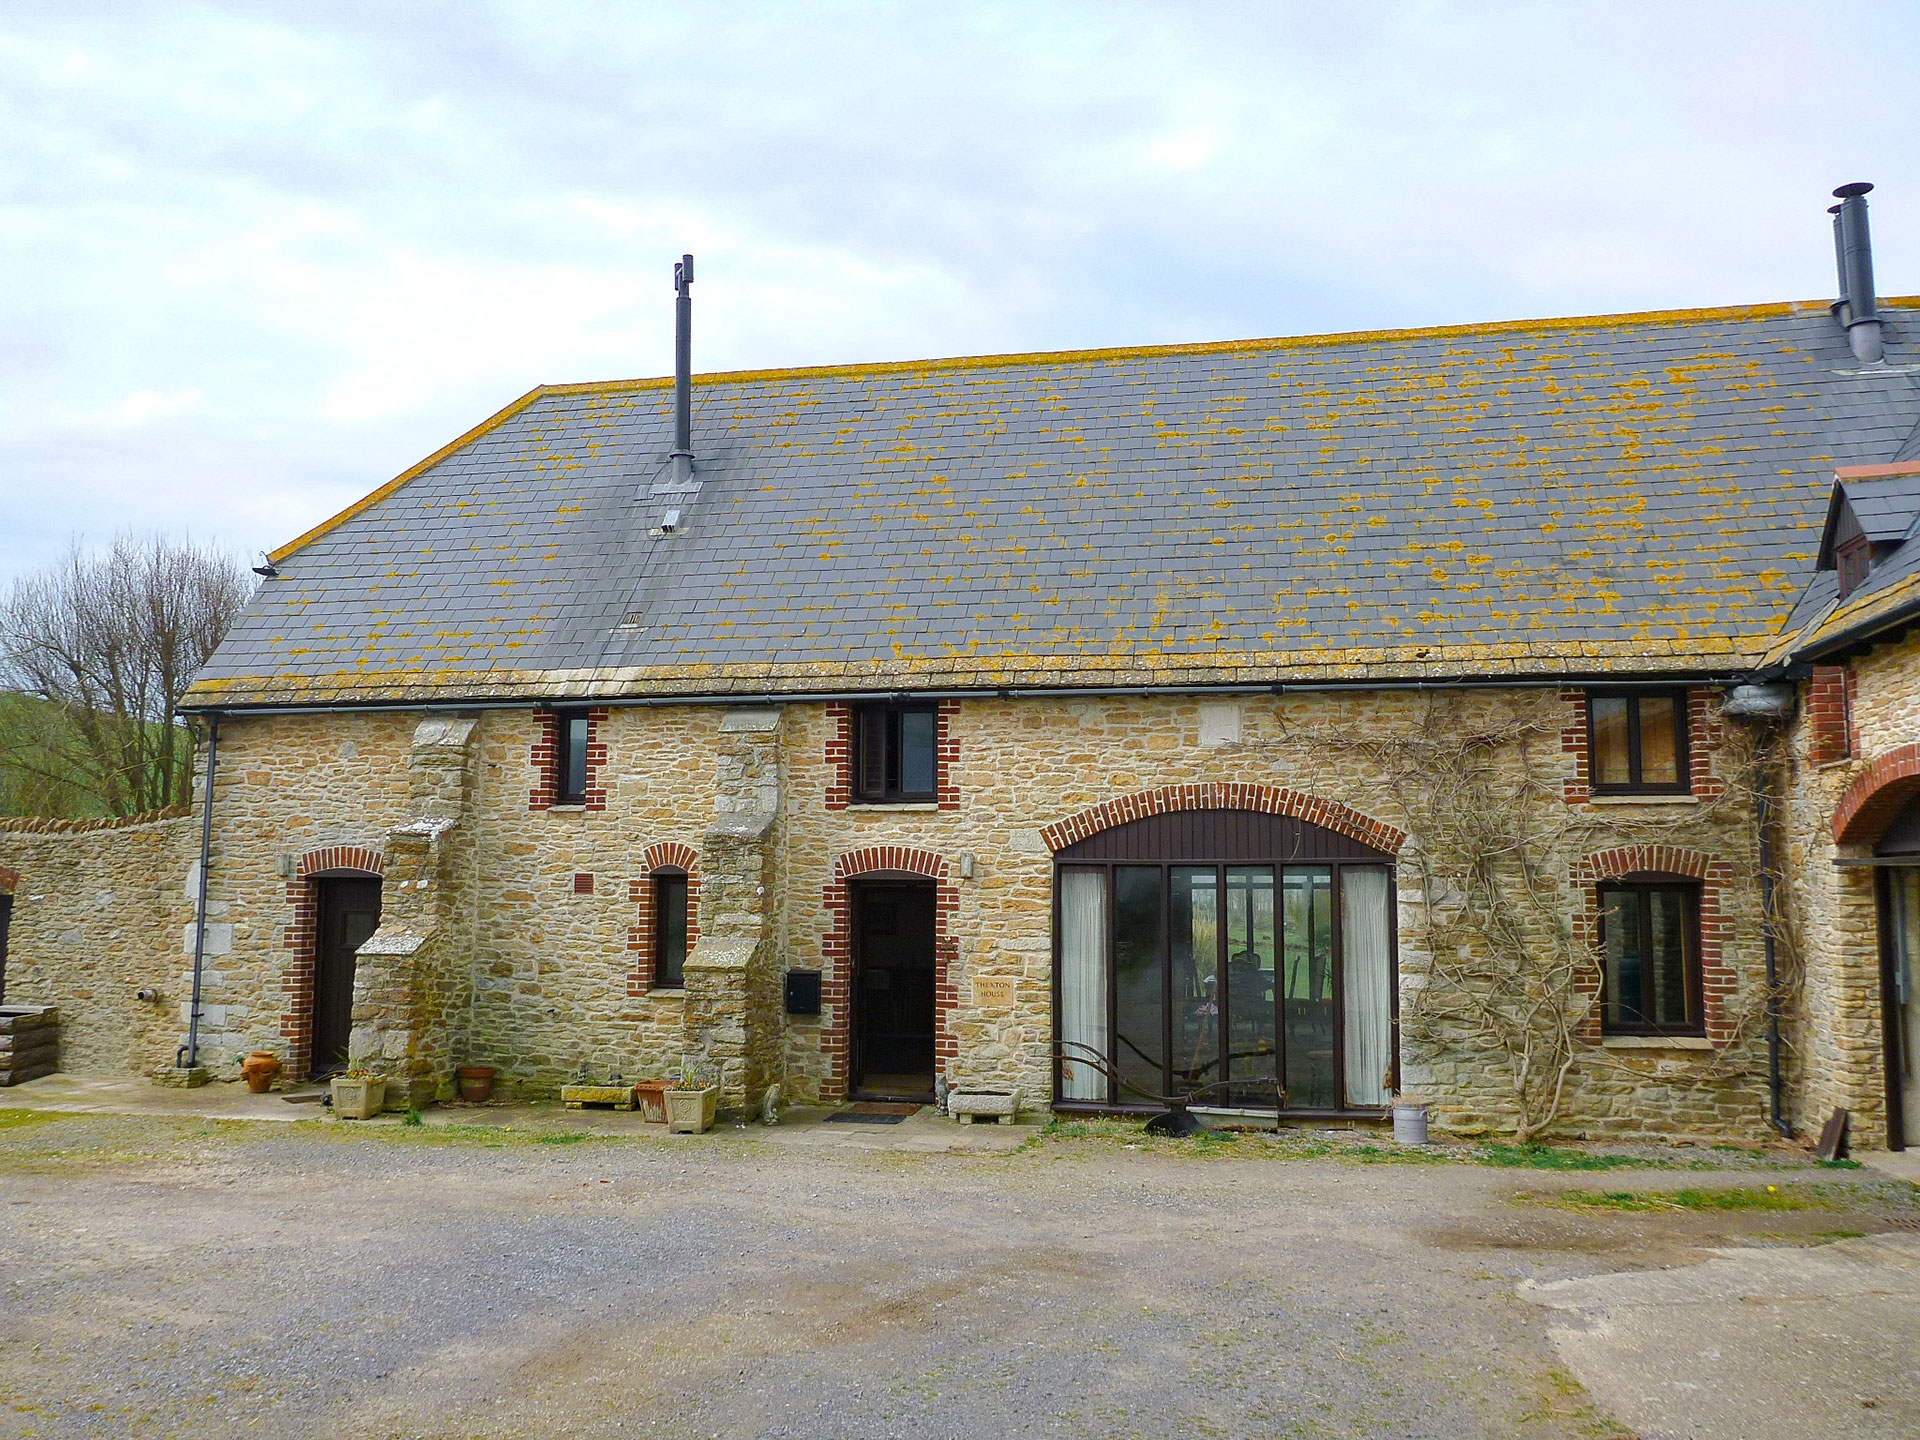 Restored stone barn with slate roof and large ground floor window